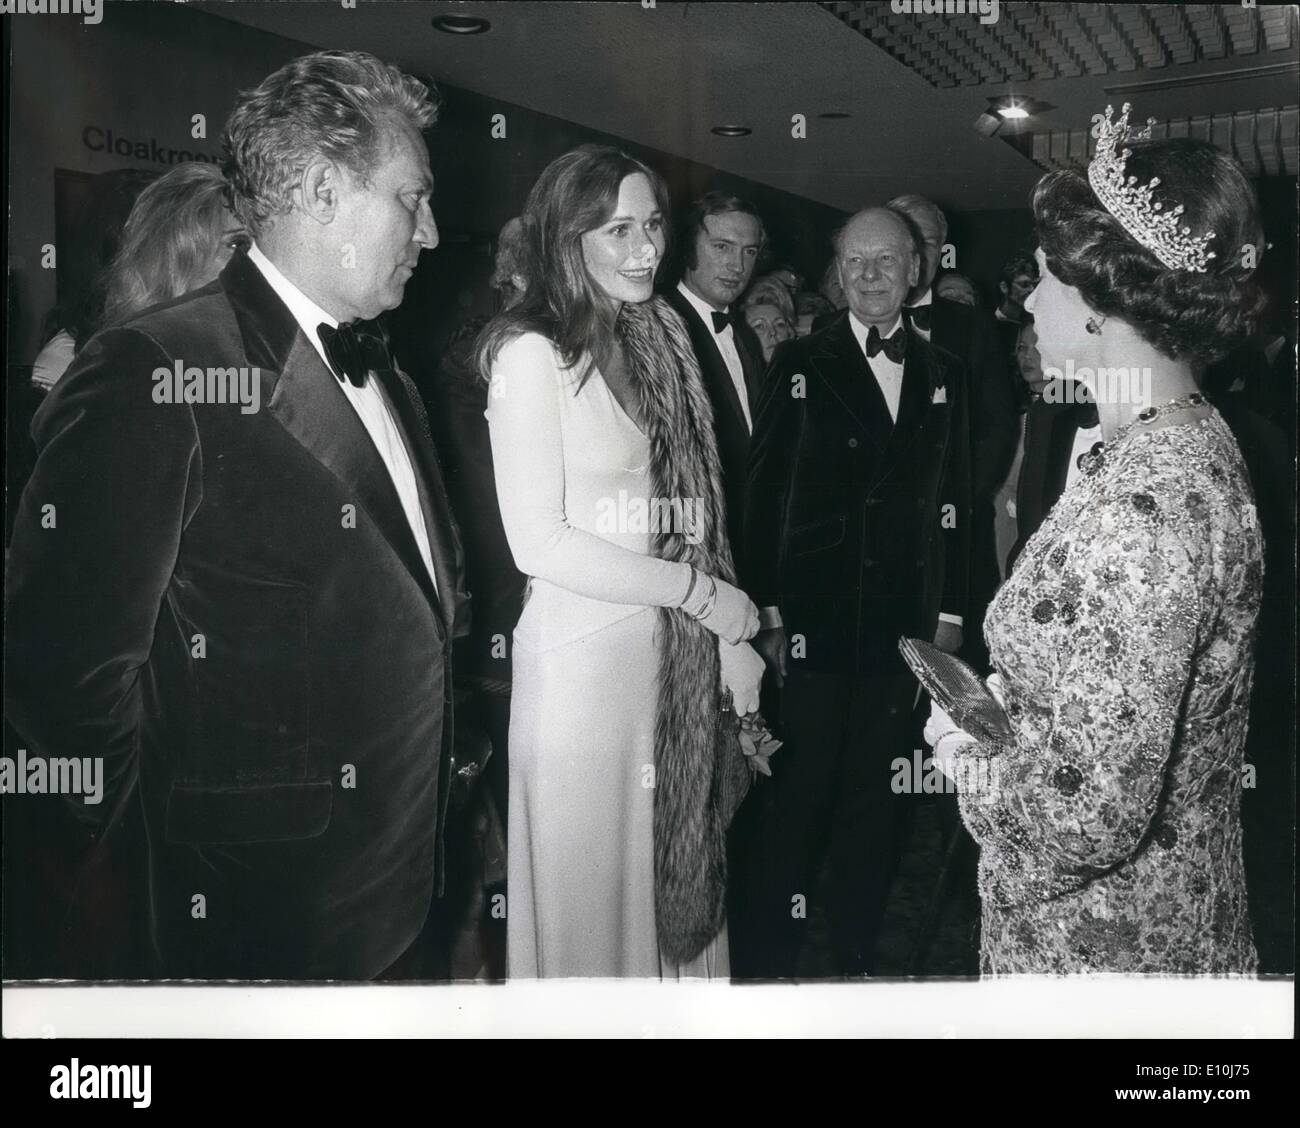 Mar. 03, 1973 - Royal Film Performance: H.M. The Queen seen talking with American actress Sally Kellerman, at the Odeon Theatre, Leicester Square. London, last night, before the Royal Film Performance of ''The Lost Horizon'', which Miss Kellerman stars. Looking on are two other stars of the film, Peter Finch (left), and Sir John Gielgud. Stock Photo